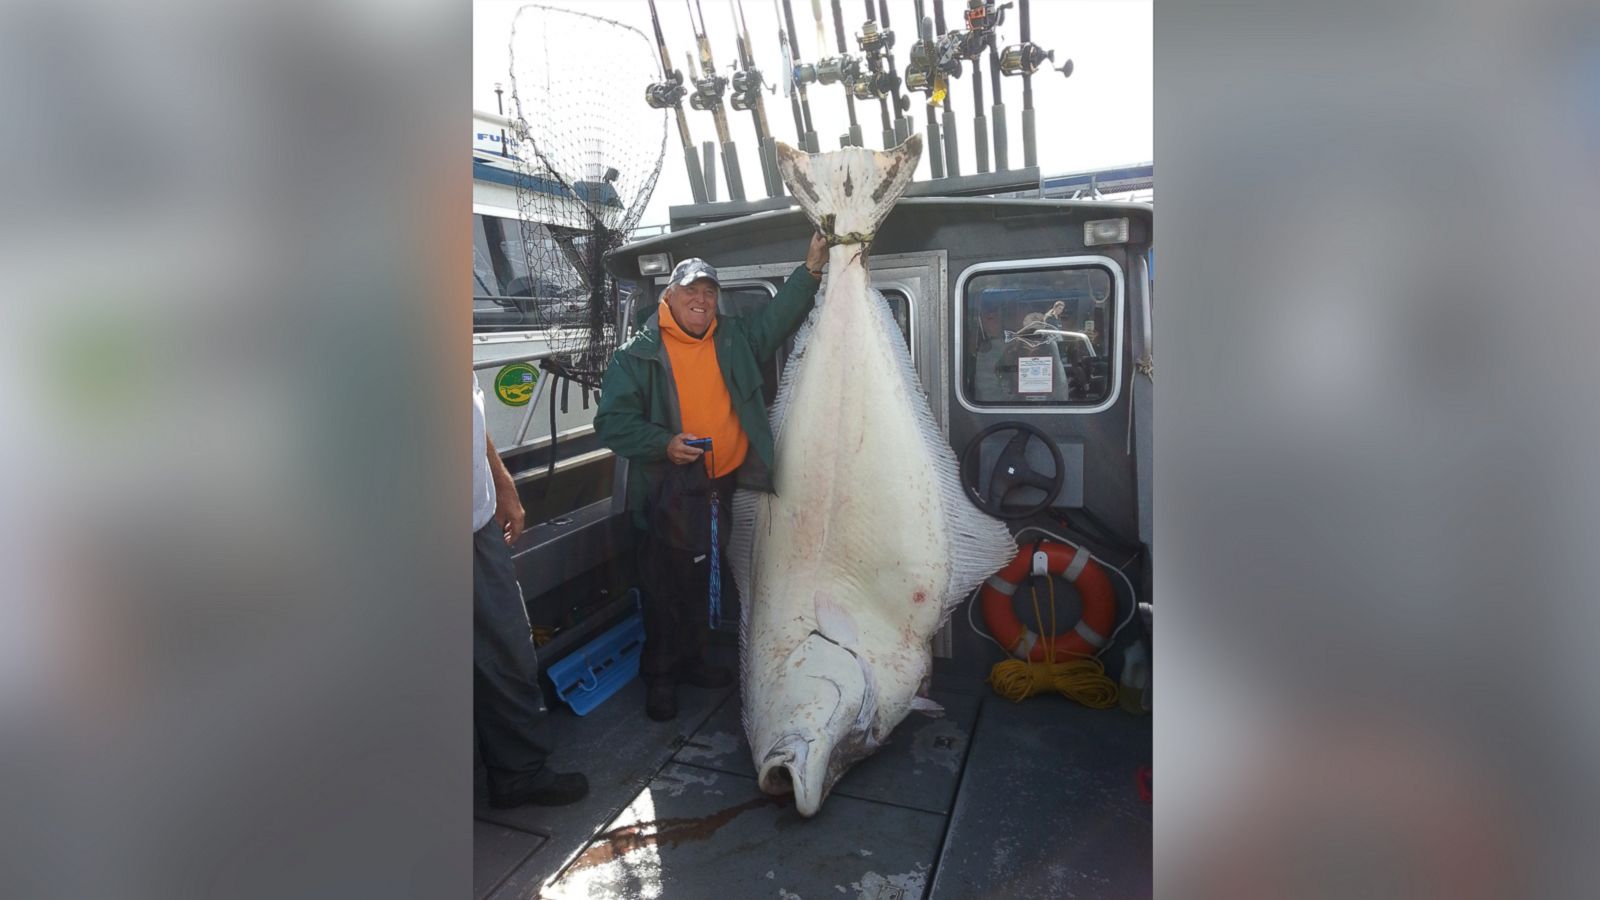 Fisherman Describes Reeling In 482-Pound Halibut - ABC News